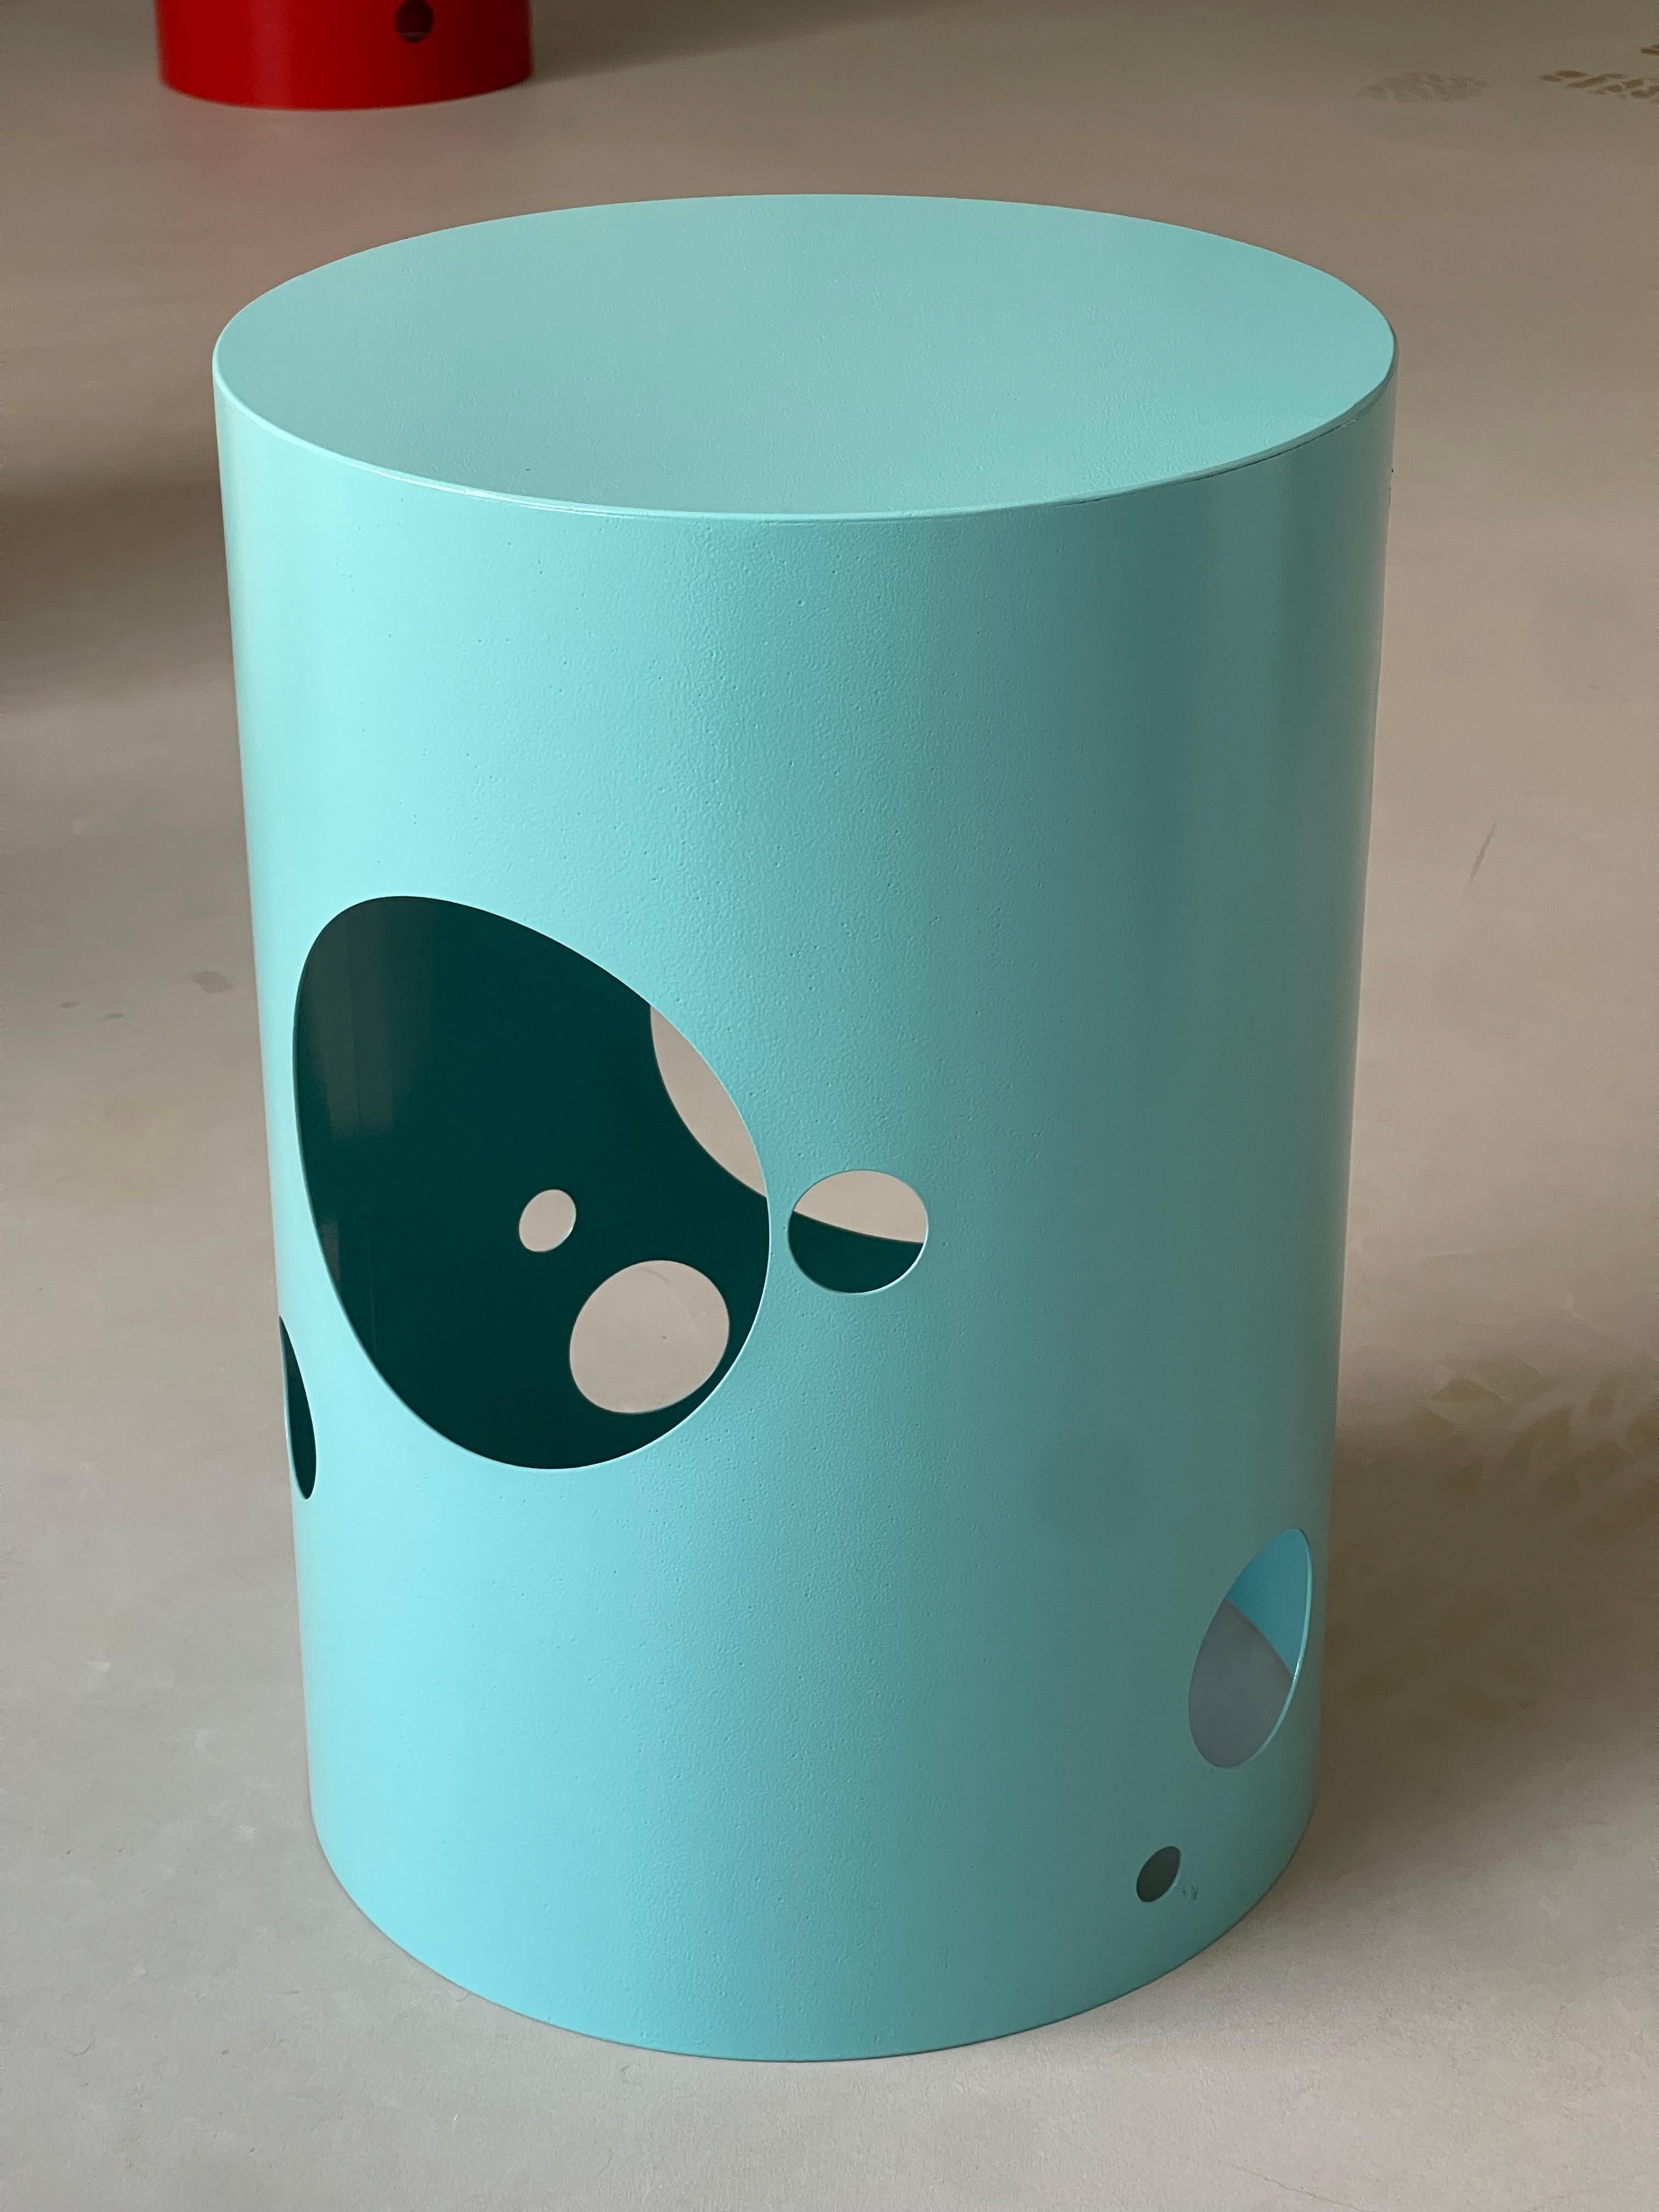 Round Side table / stool in Tiffany Blue - Spage Age Italian Designer For Sale 2